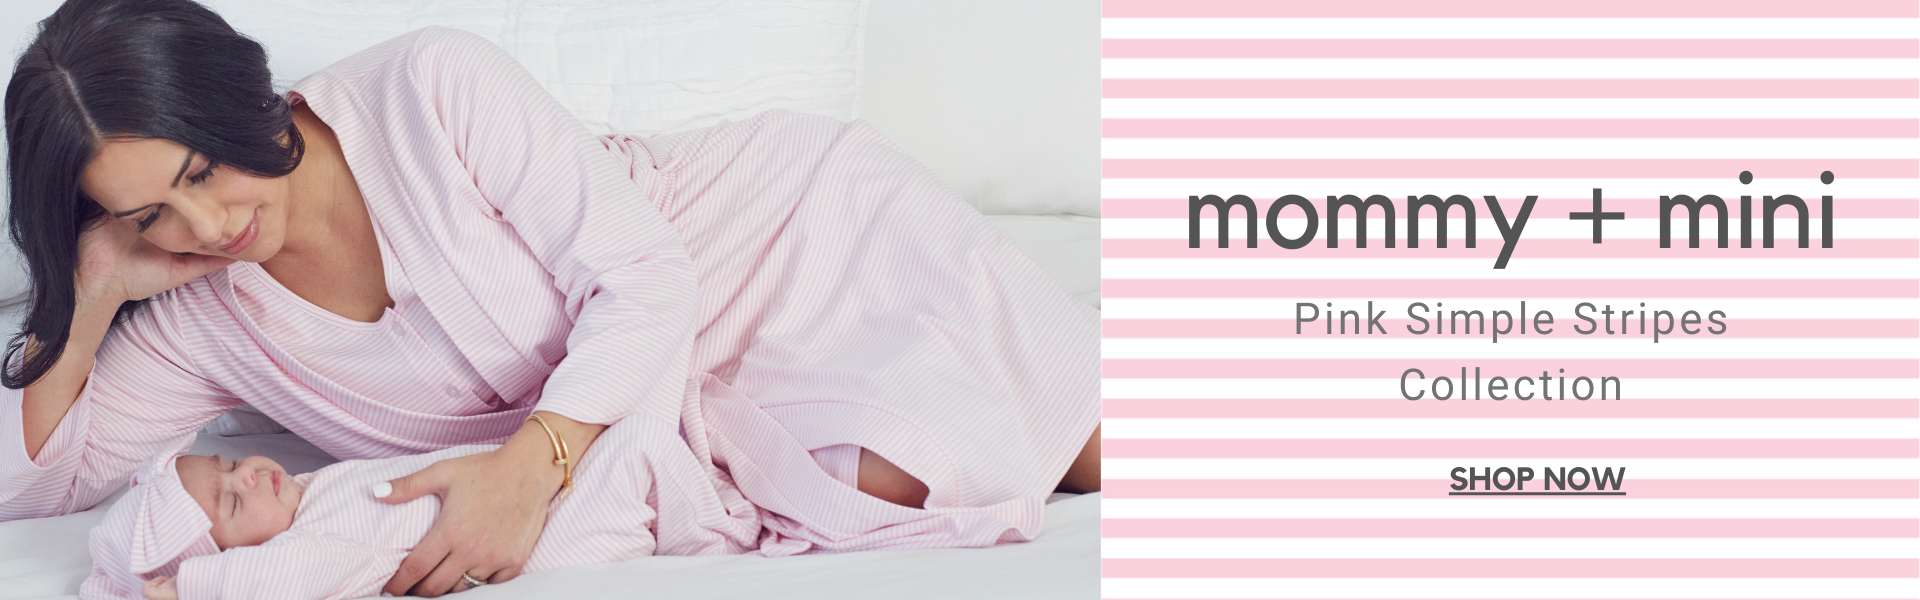 Mommy + Mini Pink Simple Stripes Collection